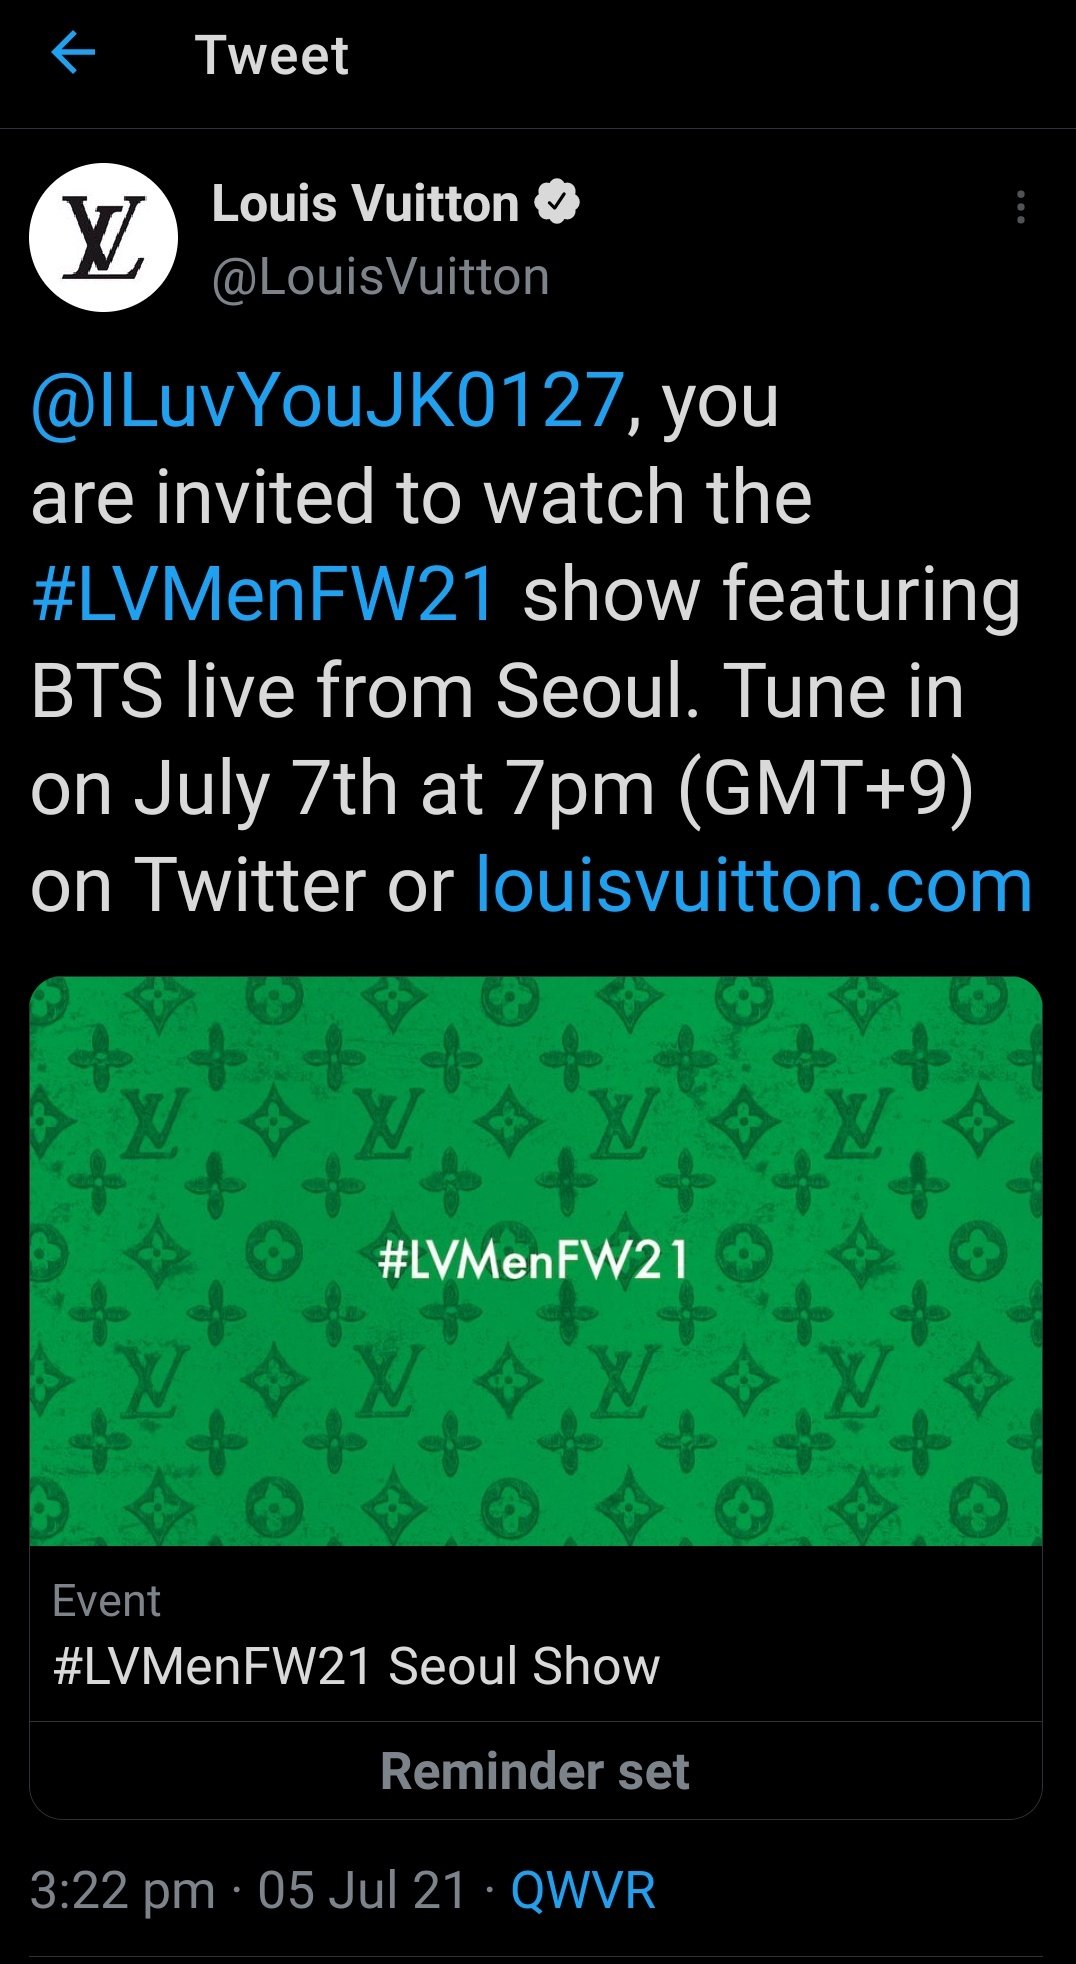 Louis Vuitton on Twitter: you are invited to watch the #LVMenFW21 show featuring BTS live Seoul. Tune in on July 7th at 7pm (GMT+9) on Twitter or https://t.co/C2G9Cq58Cx" /